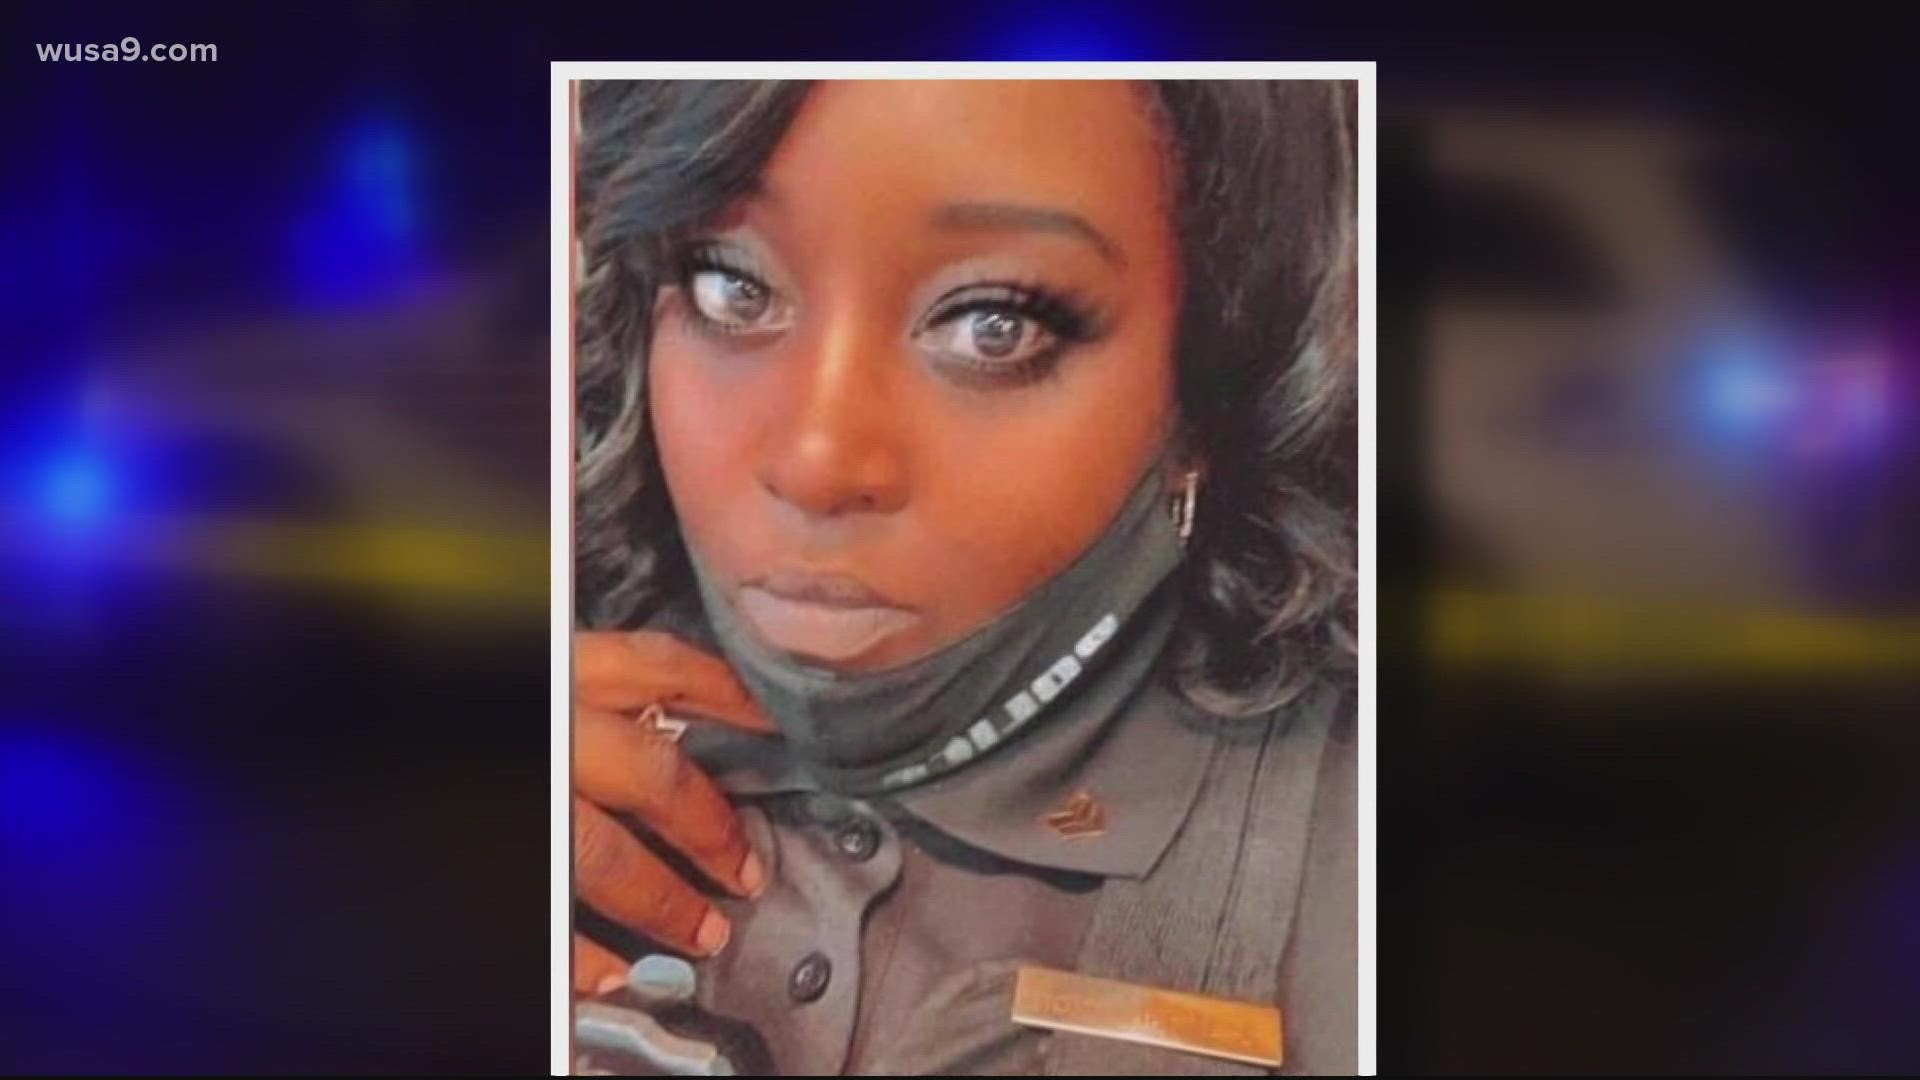 MPD identified the officer killed as 41-year-old Angela Washington.